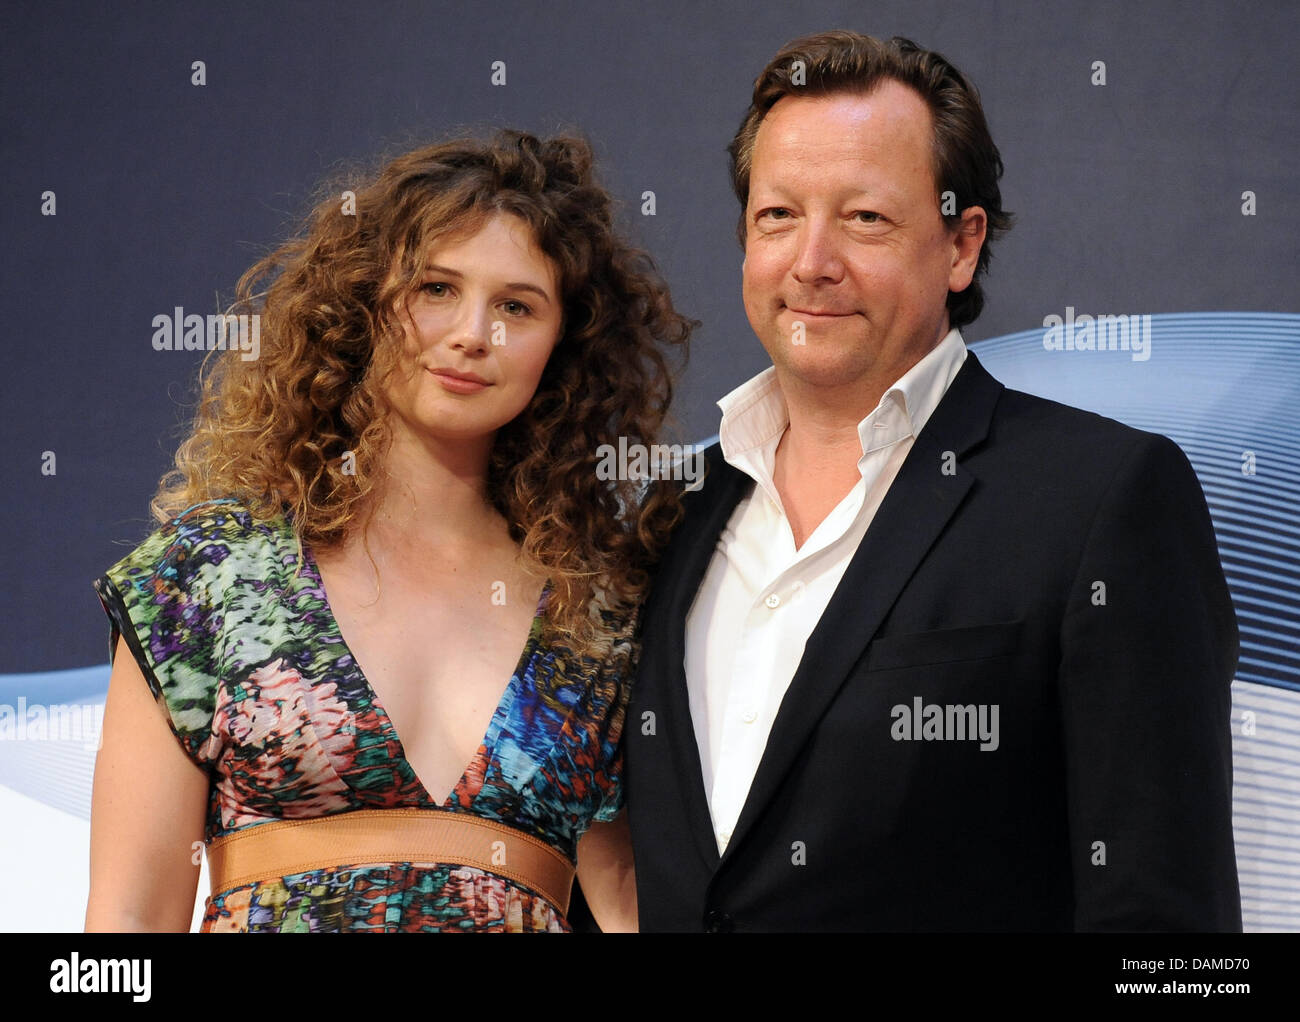 The actors Anna Maria Sturm and Matthias Brandt arrive at the Astor Film Lounge in Berlin, Germany, 6 June 2011. The TV-series 'Polizeiruf 110' celebrates its 40th anniversary. the first episode was broadcasted on 27 June 1971. Photo: Britta Pedersen Stock Photo